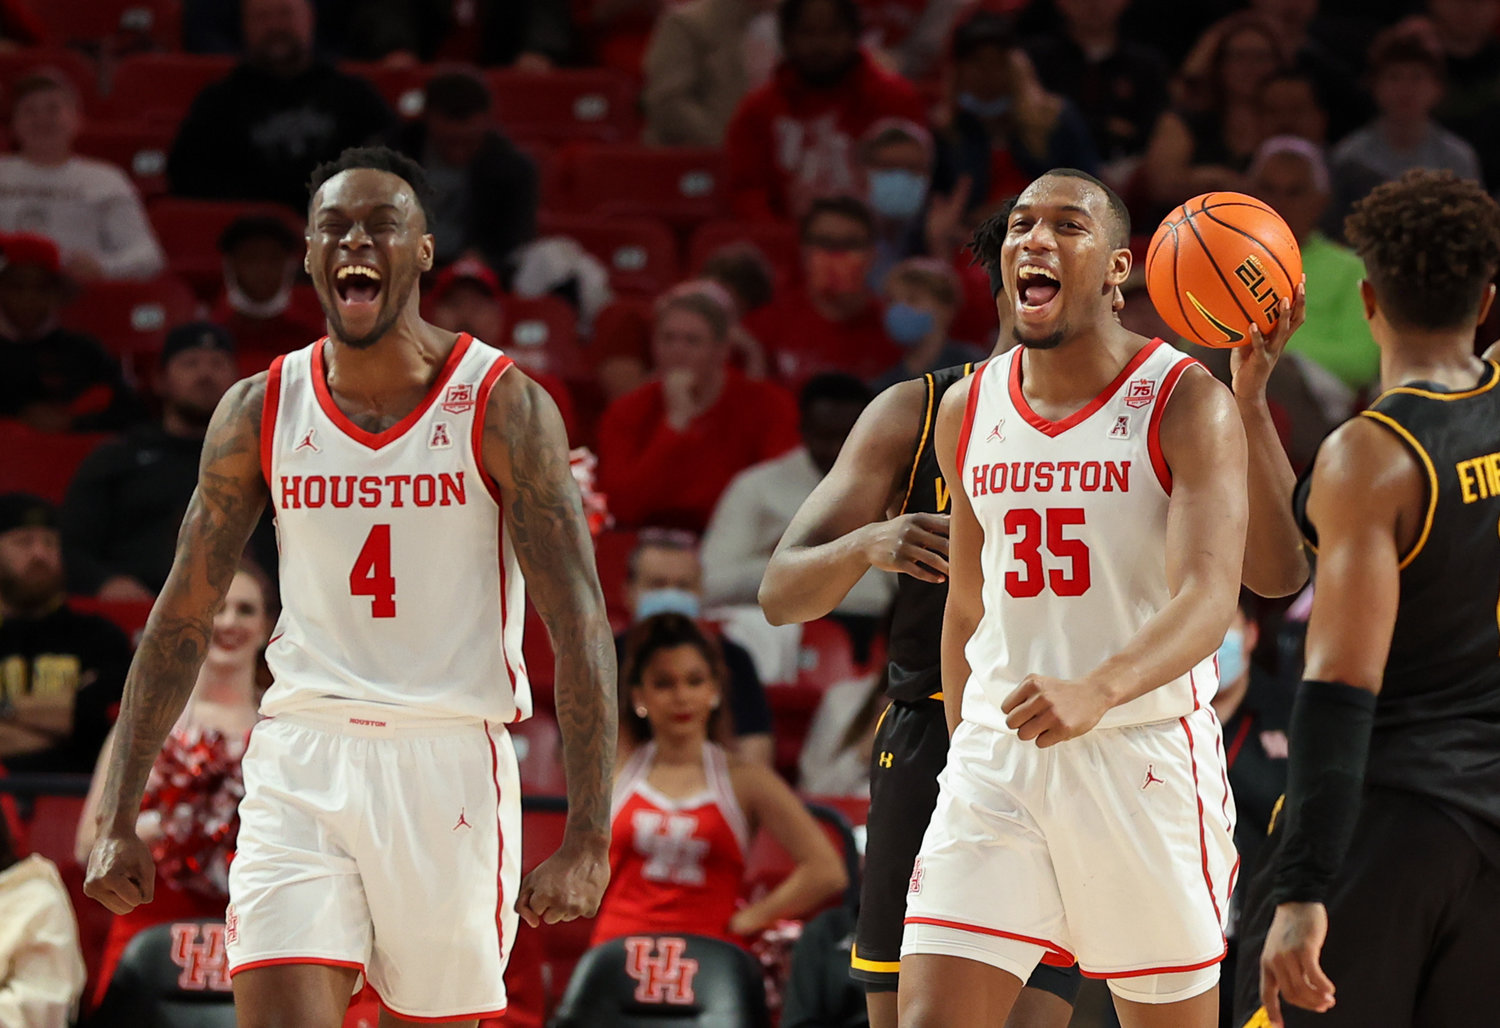 Houston Cougars guard Taze Moore (4) and forward Fabian White Jr. (35) react after blocking a shot during an NCAA men’s basketball game between Houston and Wichita State on Jan. 8, 2022 in Houston, Texas.